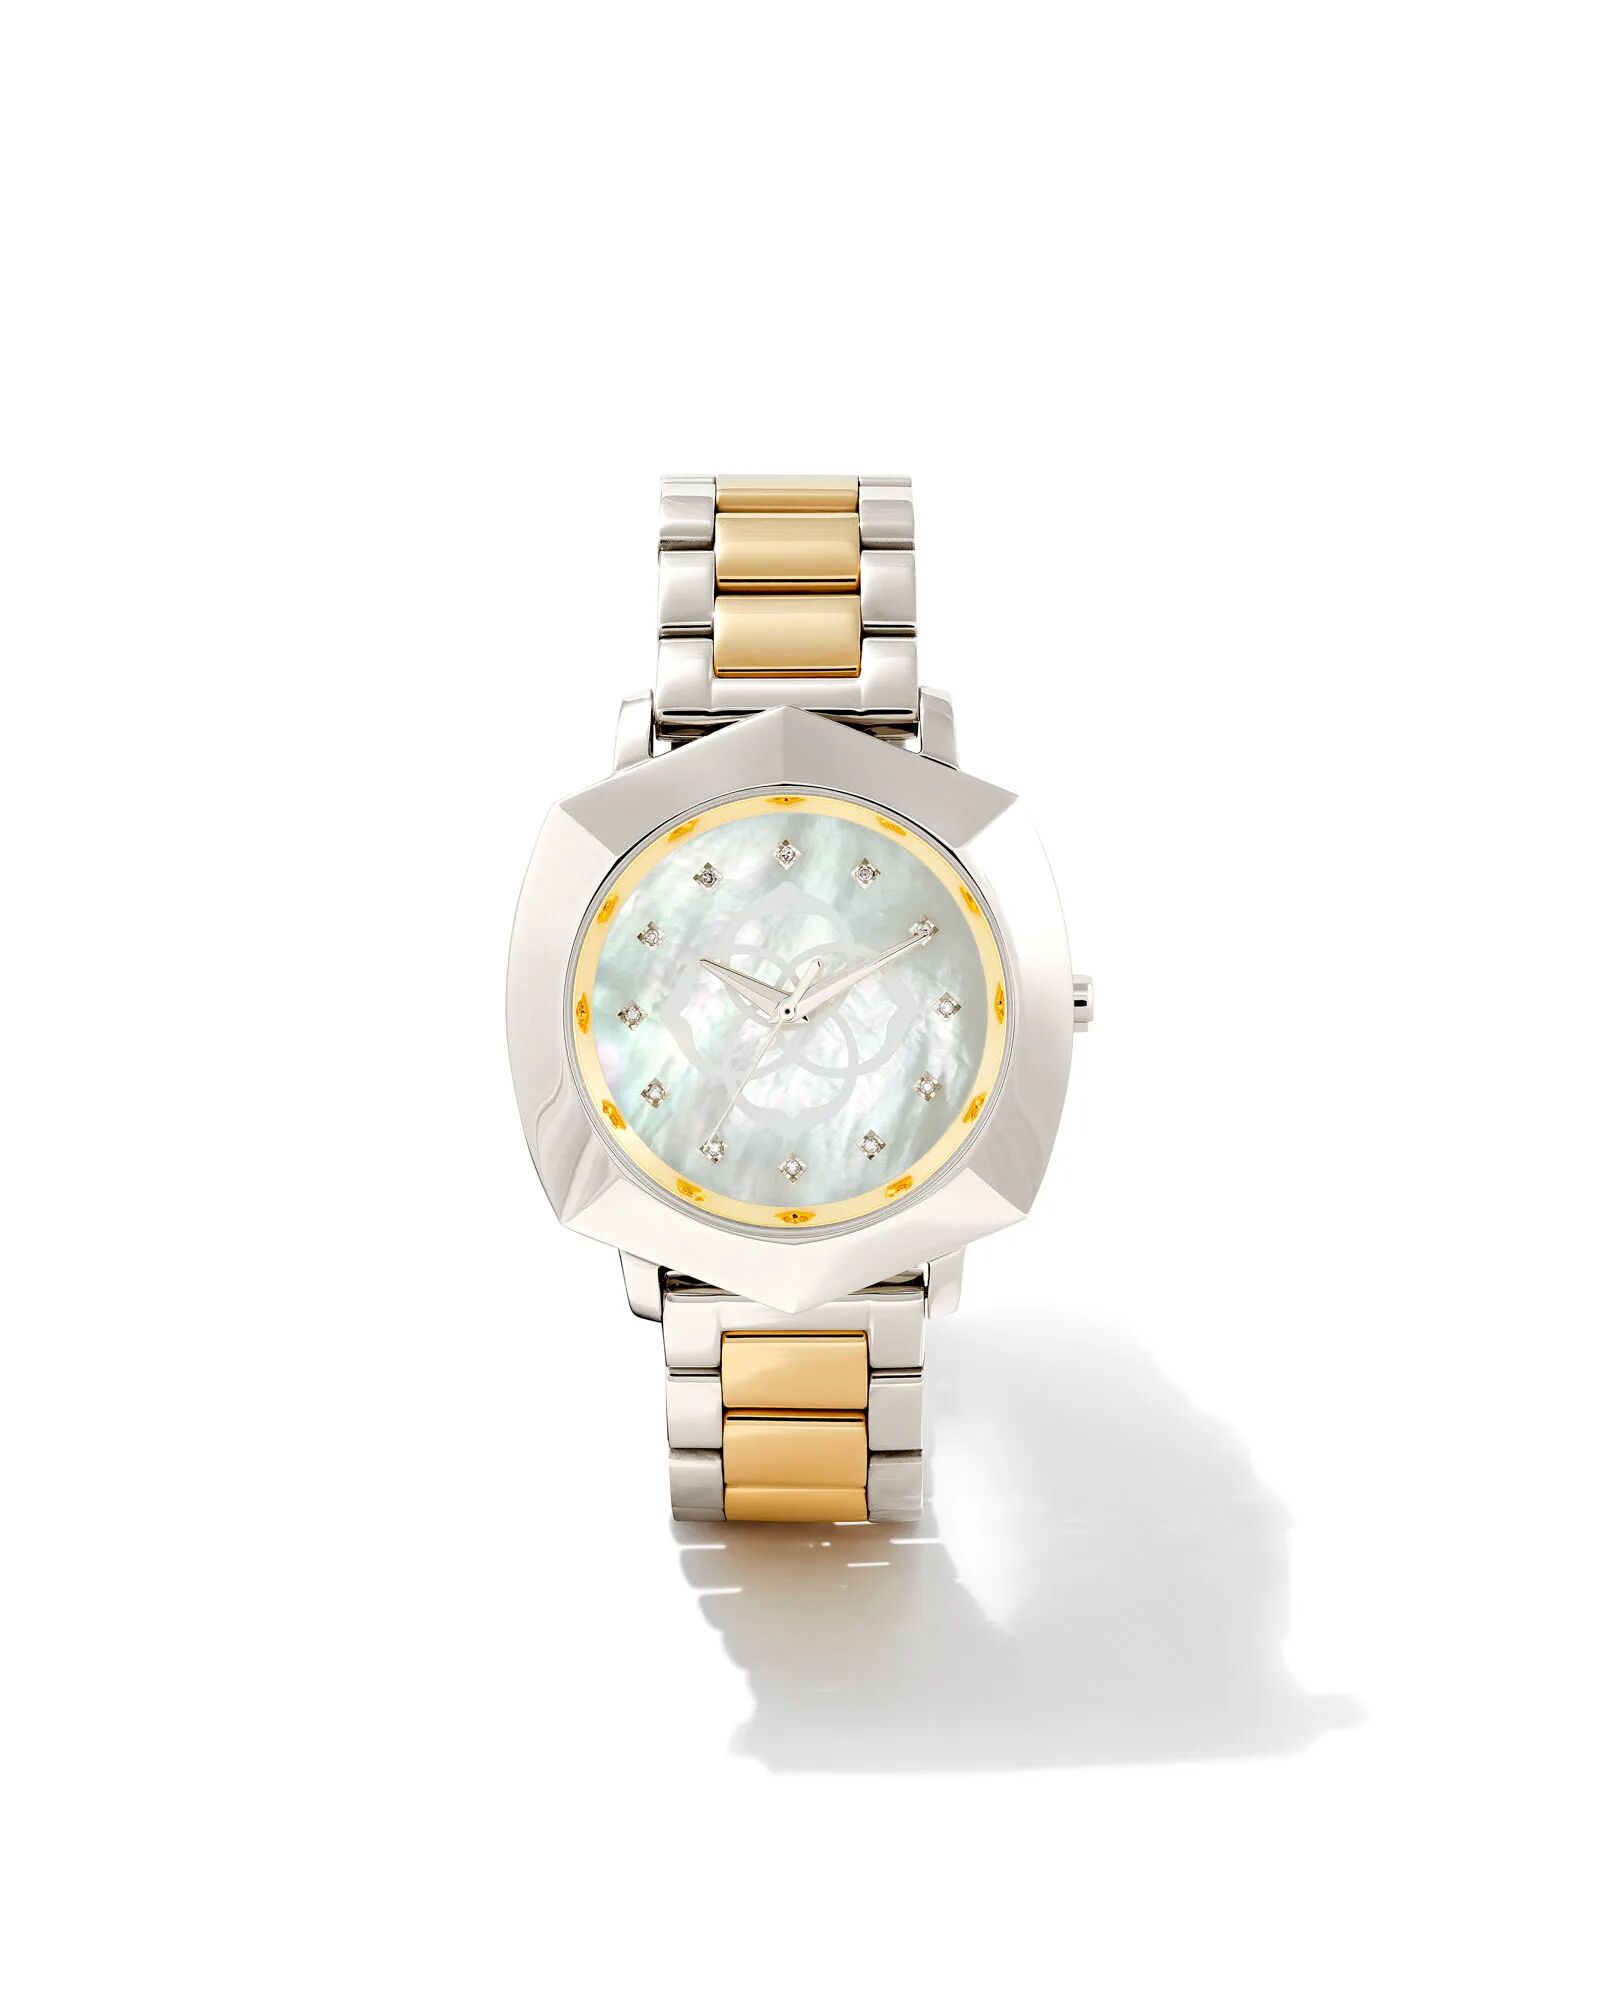 Kendra Scott Dira Two Tone Stainless Steel 38mm Diamond Dial Watch in Ivory Mother-of-Pearl   Mother Of Pearl